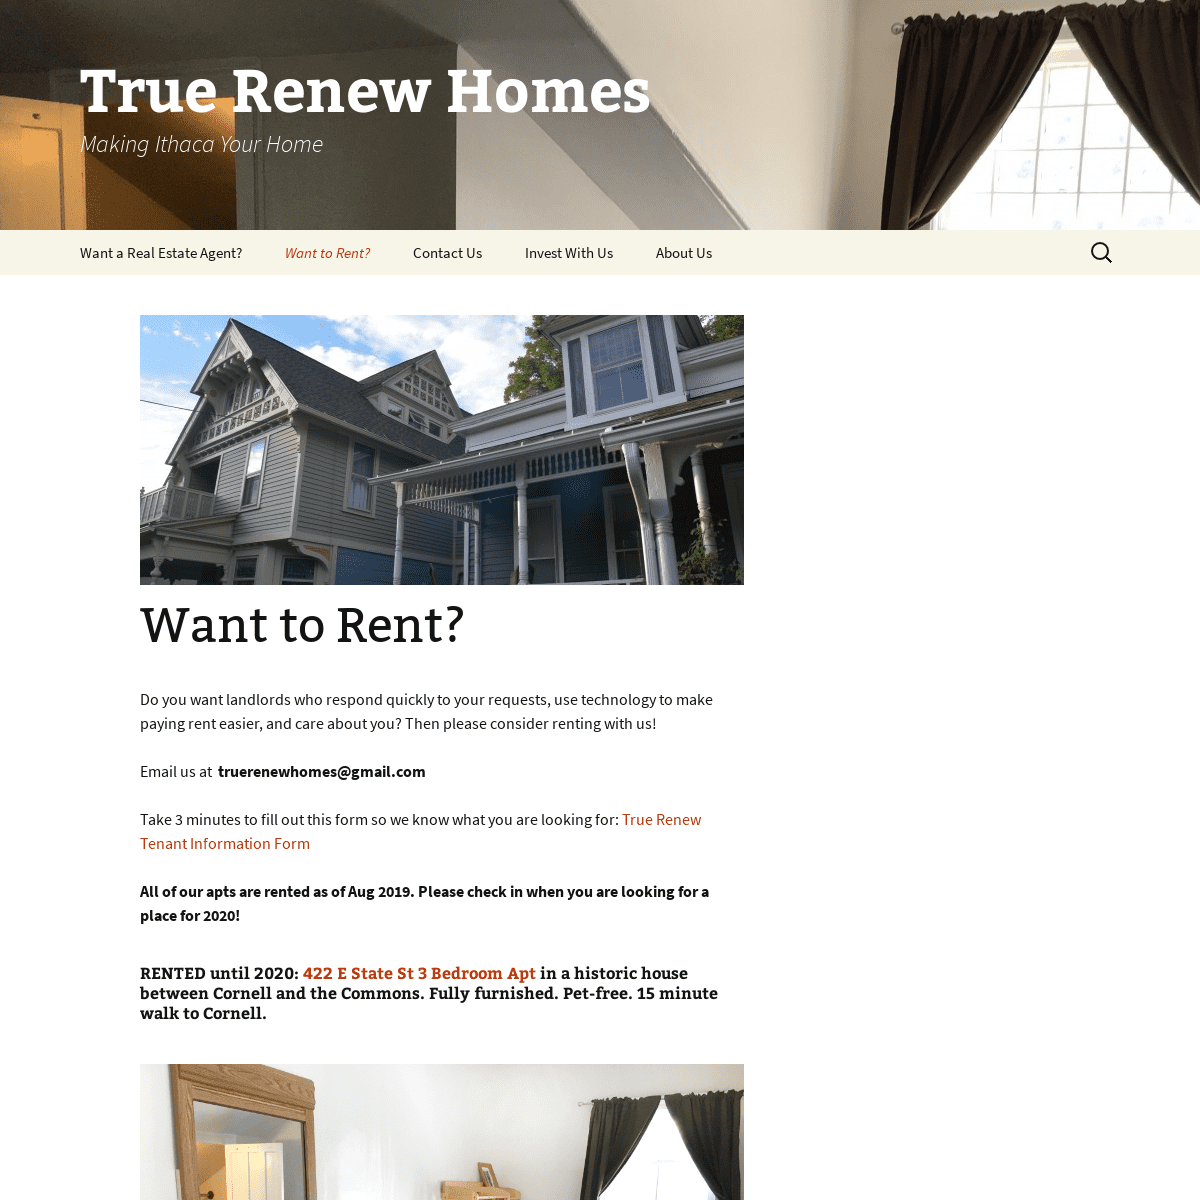 True Renew Homes | Making Ithaca Your Home